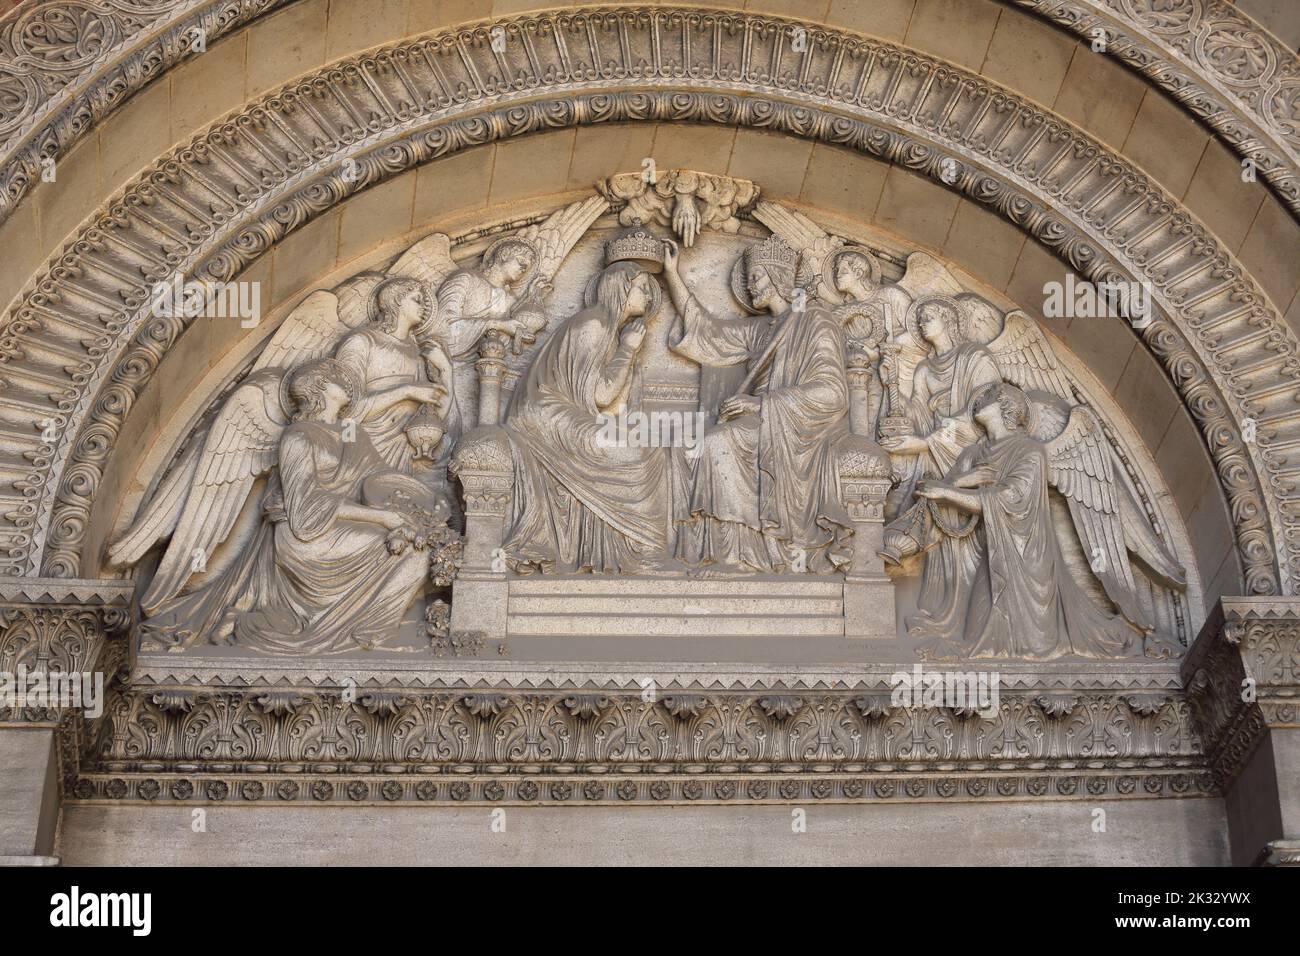 Cathedrale Sainte-Marie-Majeure (Cathedral of Saint Mary Major) Tympanum Above Entrance of the Virgin Mary's Coronation by Eugene Guillaume Marseille Stock Photo